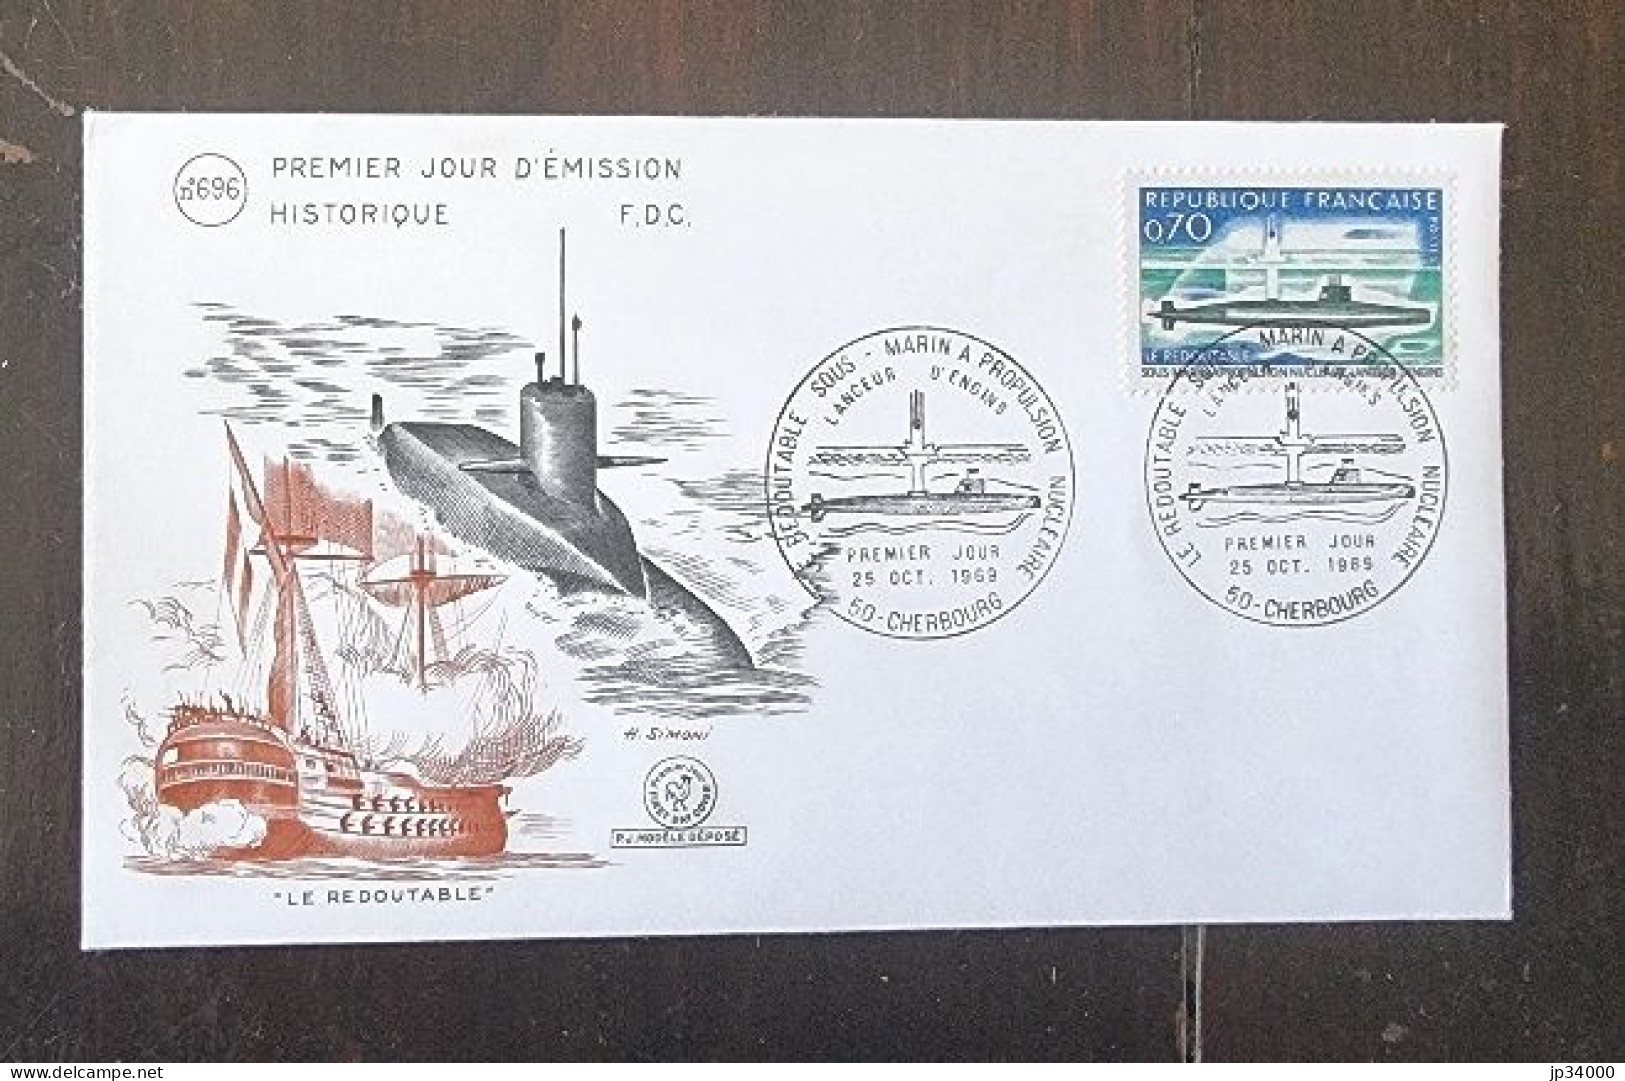 FRANCE Le Redoutable, Sous Marin. Yvert N° 1615. FDC, 1er Jour 1969 Cachet Cherbourg - U-Boote